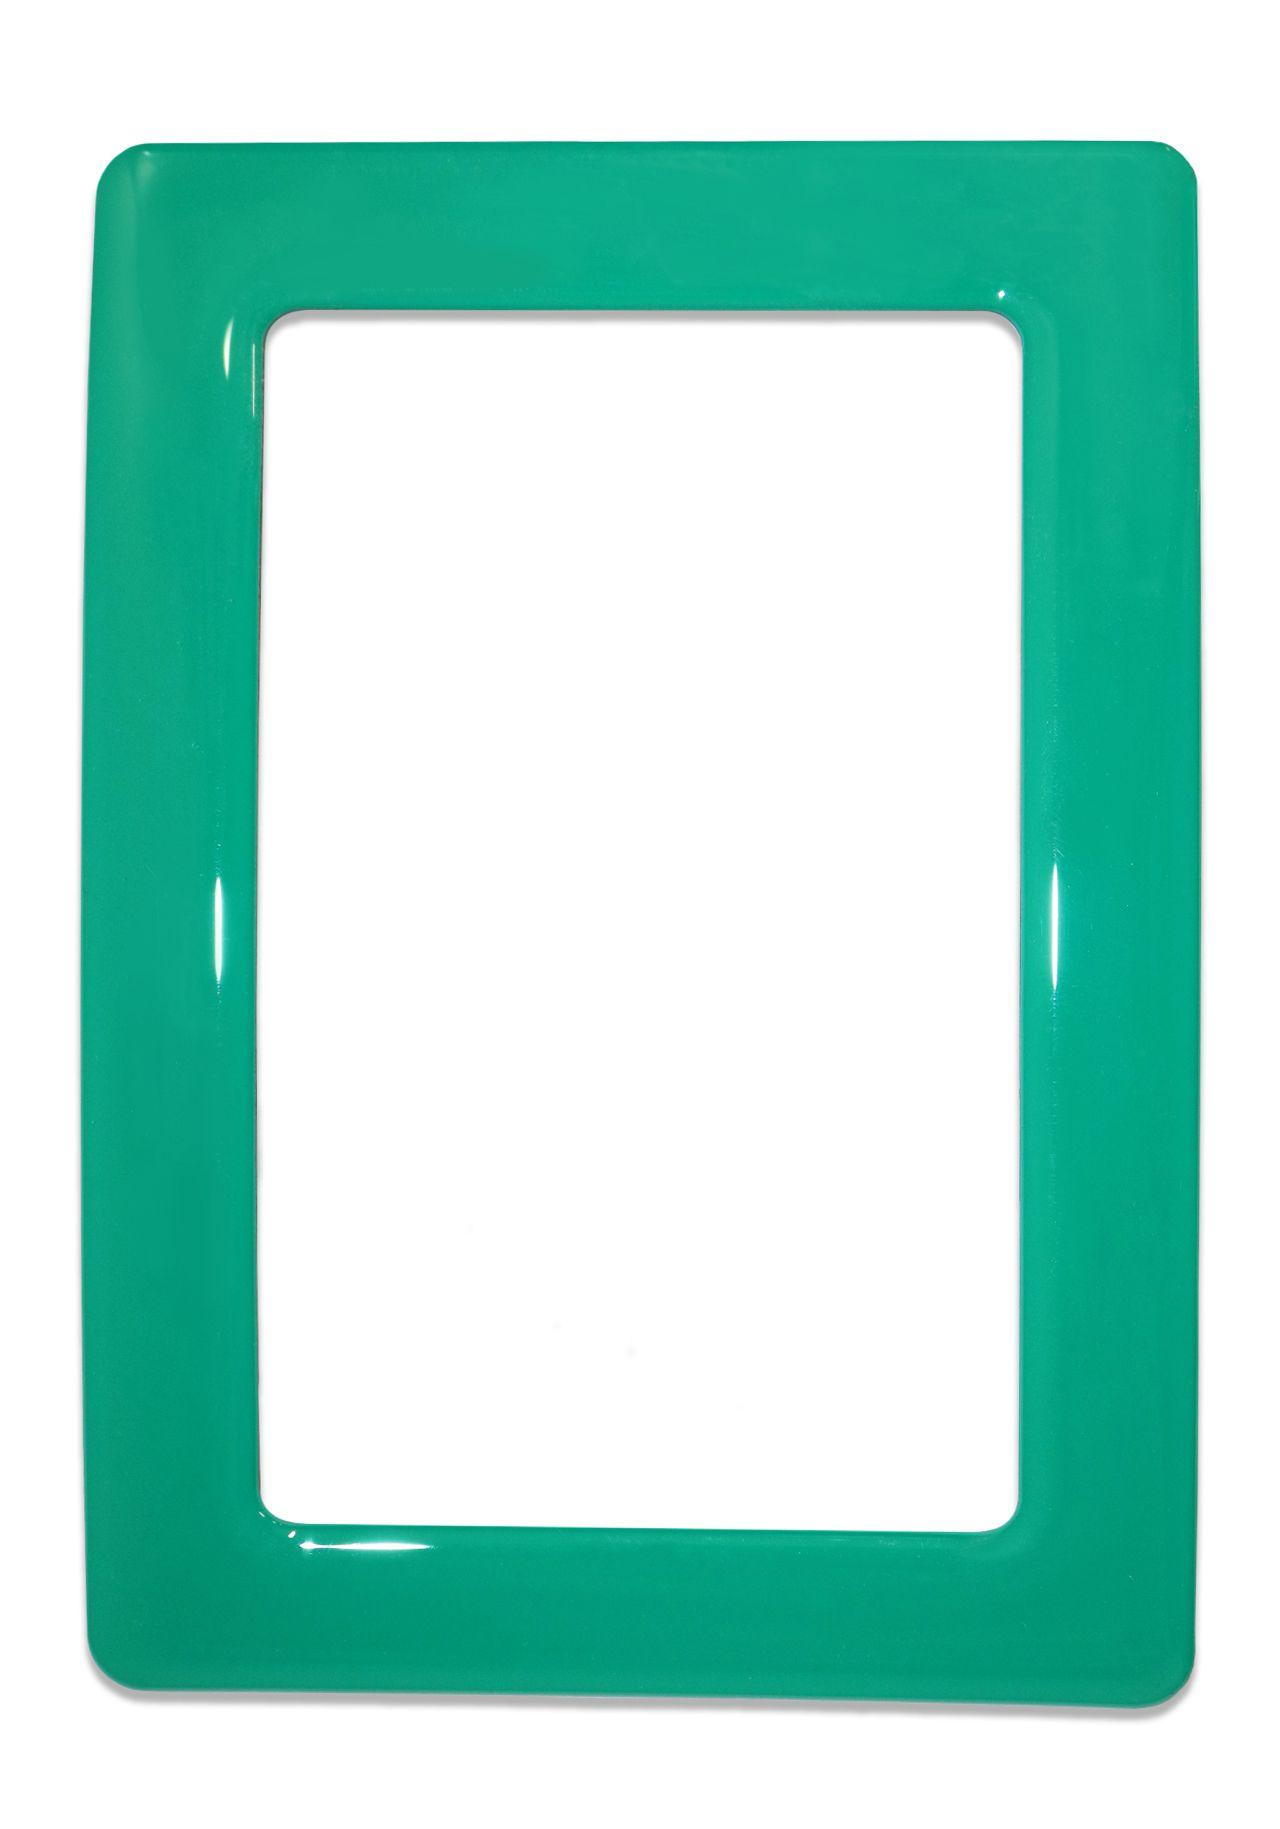 Magnetic self-adhesive frame size 12.3x8.1cm - green